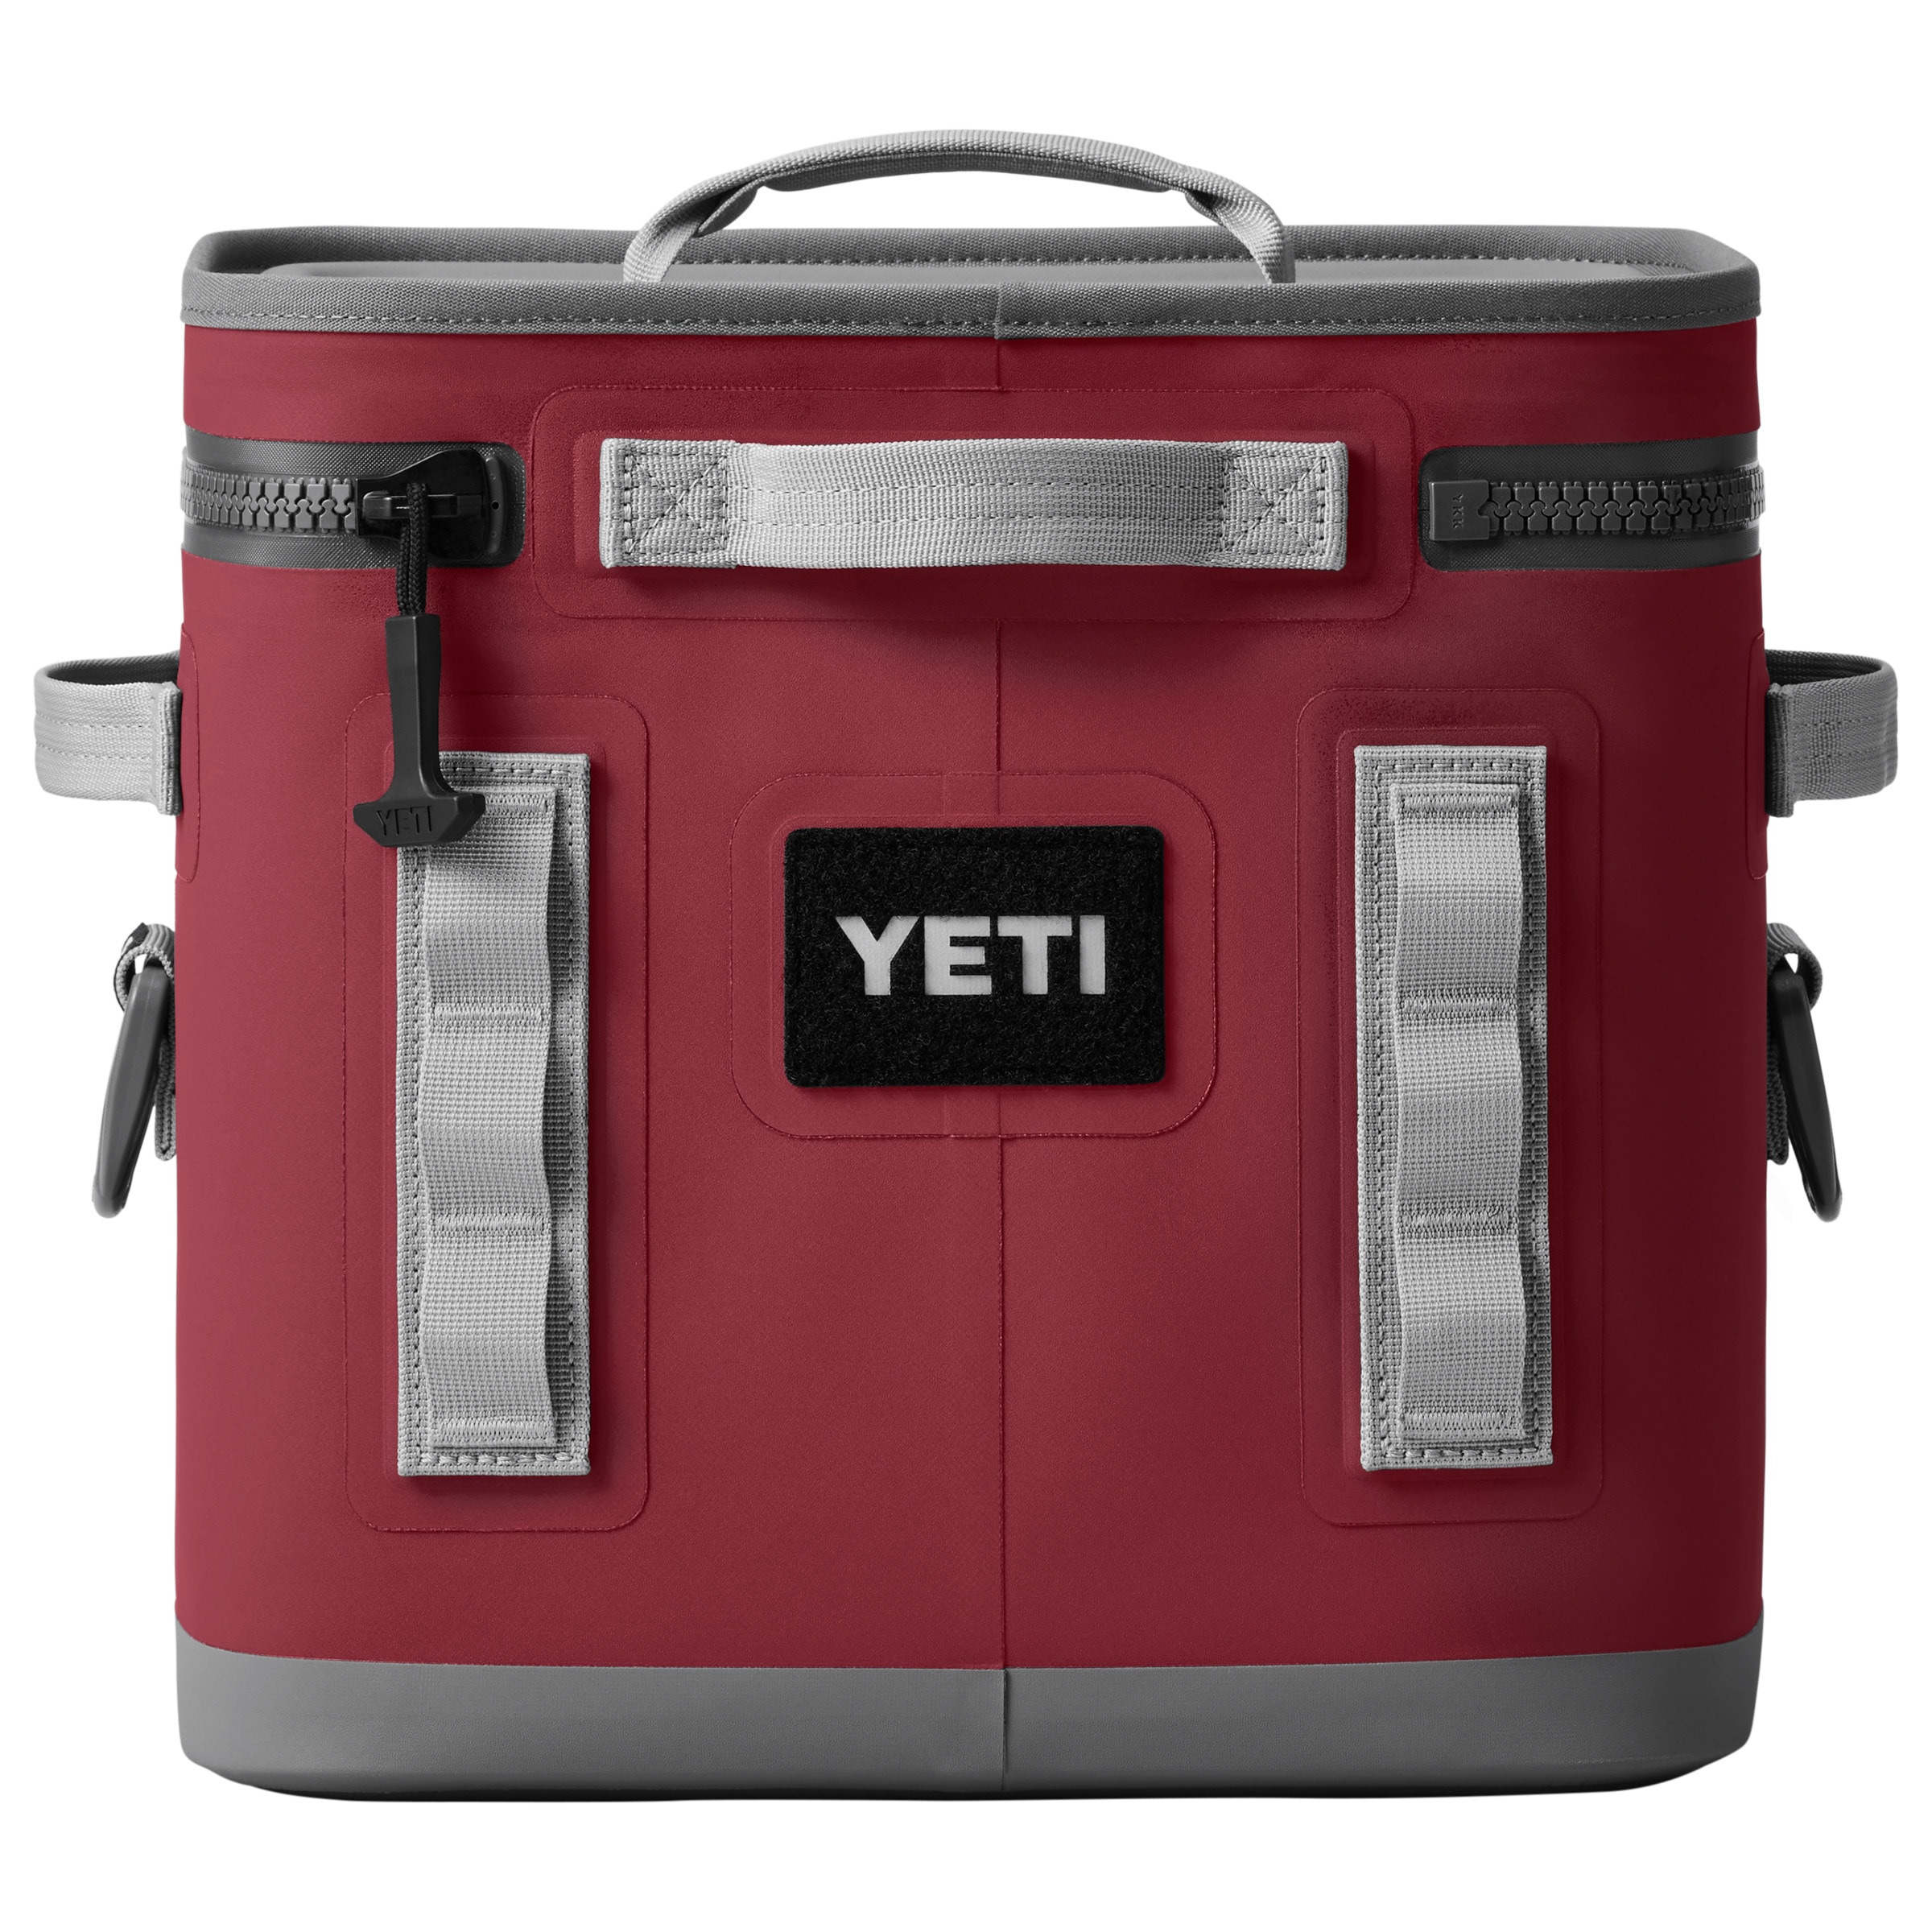 NEW LIMITED EDITION UNRELEASED Yeti hopper flip 12 soft cooler